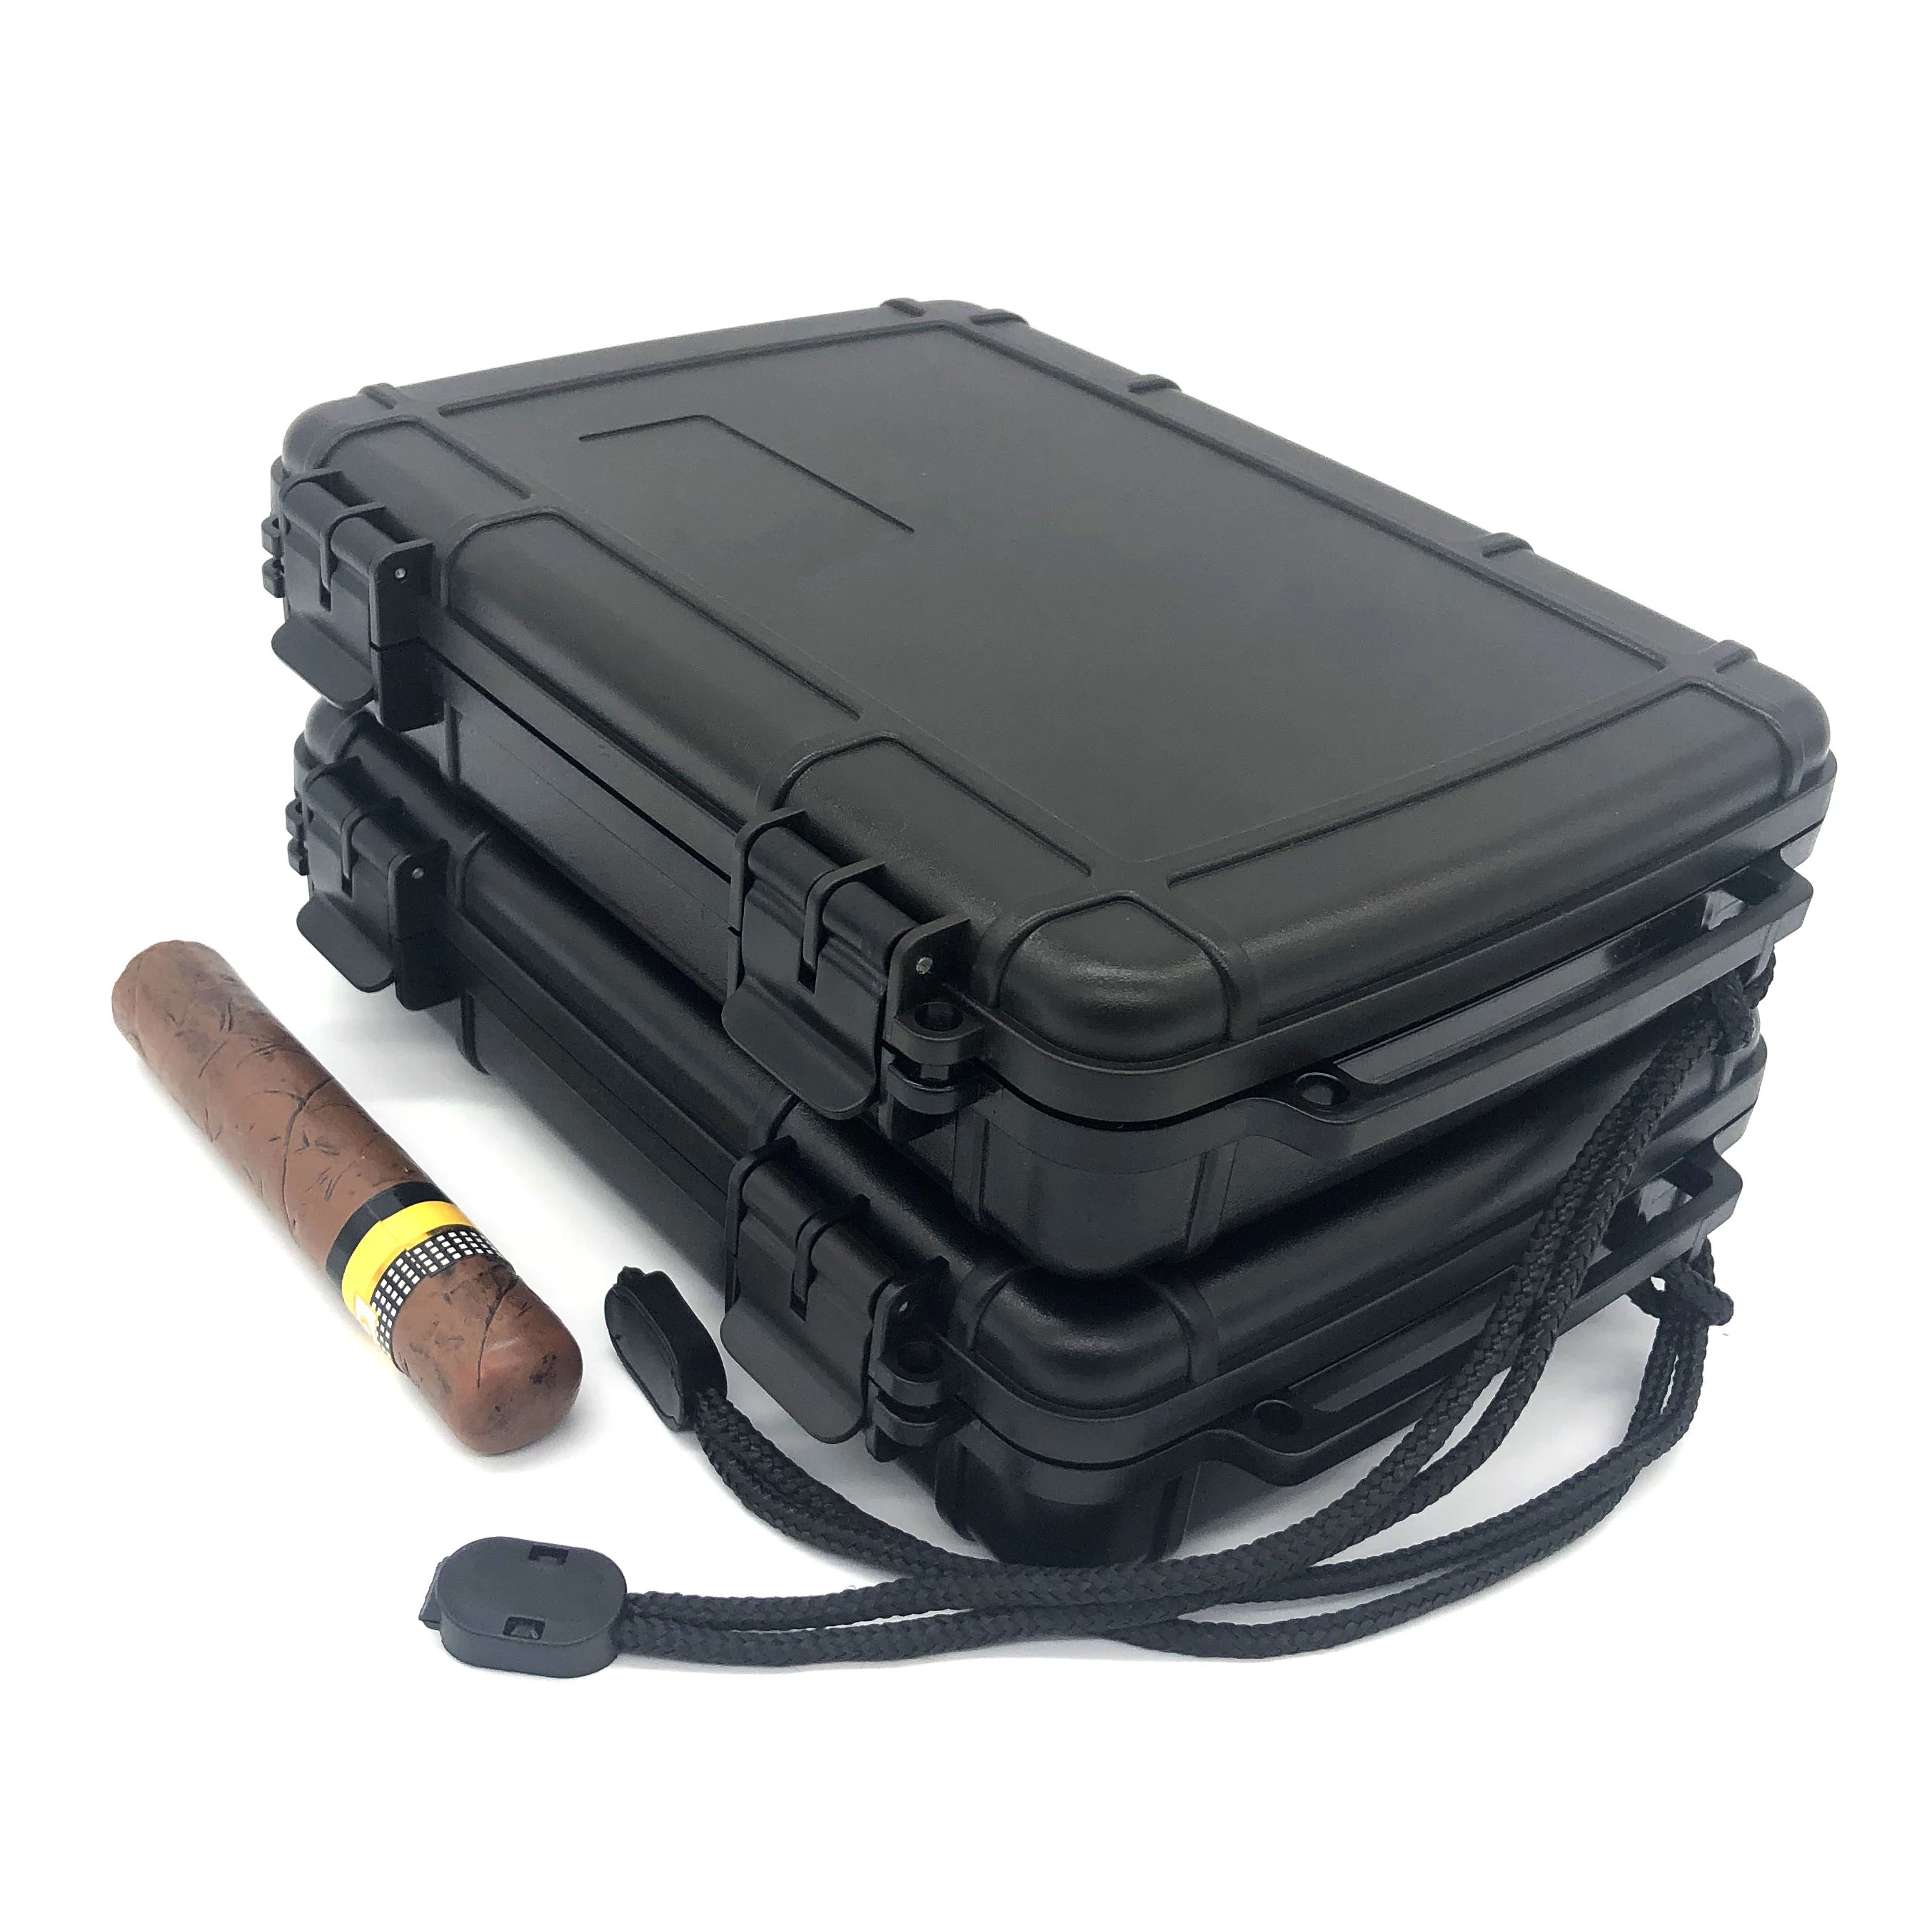 Portable Plastic Designed Weed Roll Smoking Storage Travel Cigar Humidor Case with Custom foam Lighter Cutter